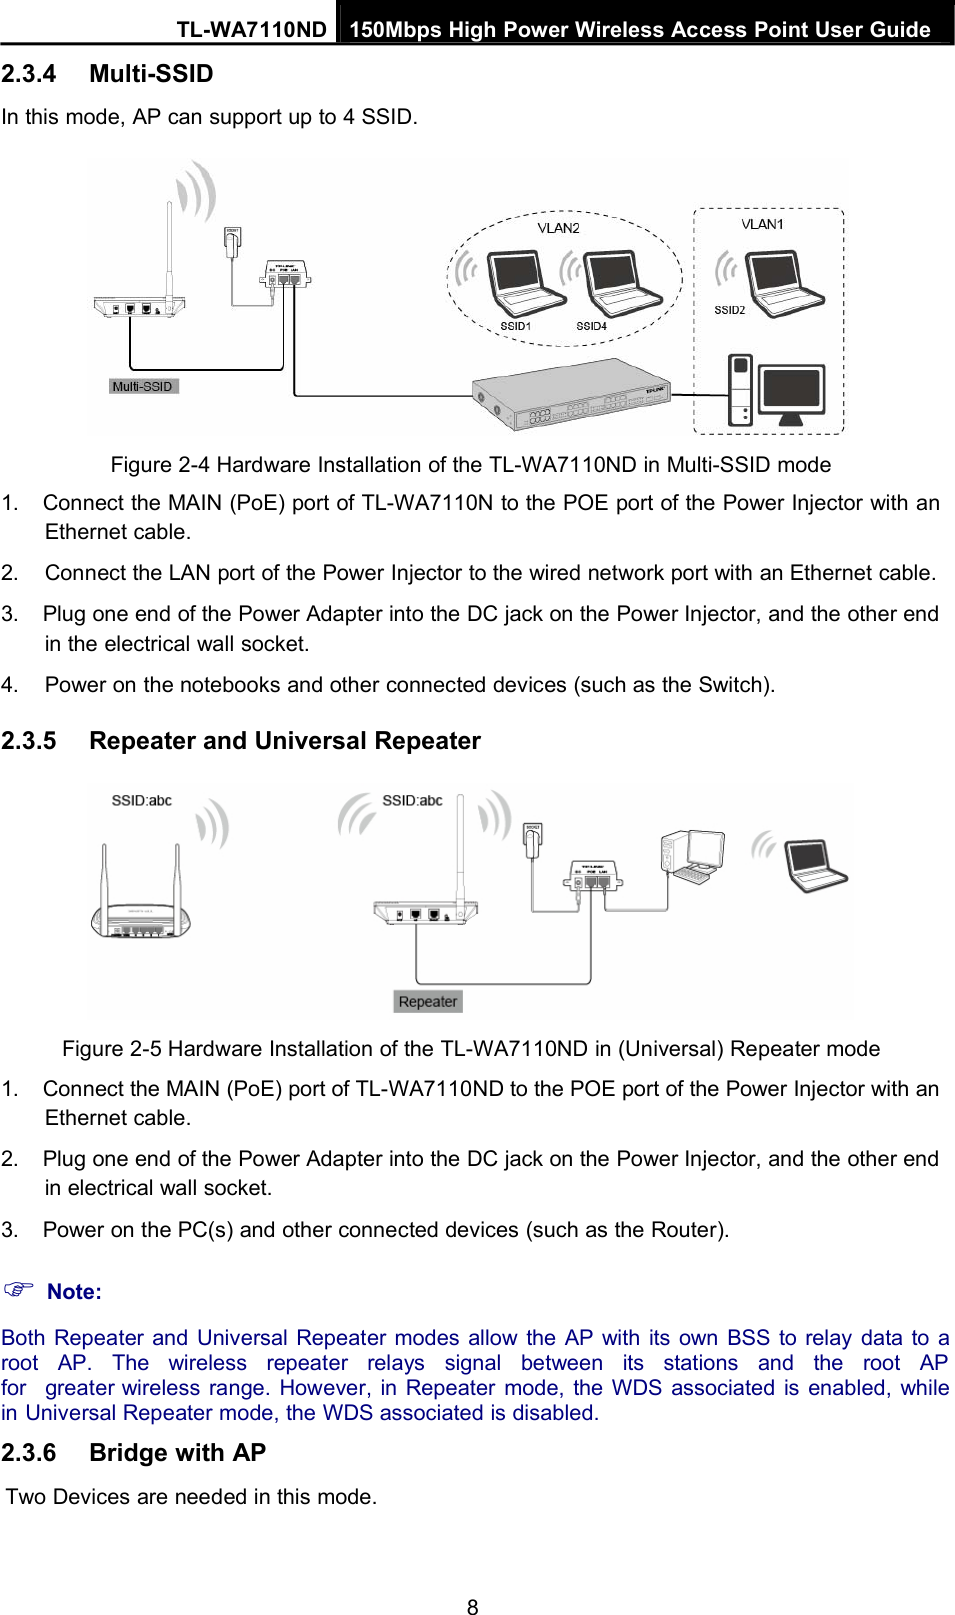 TL-WA7110ND 150Mbps High Power Wireless Access Point User Guide2.3.4 Multi-SSIDIn this mode, AP can support up to 4 SSID.Figure 2-4 Hardware Installation of the TL-WA7110ND in Multi-SSID mode1. Connect the MAIN (PoE) port of TL-WA7110N to the POE port of the Power Injector with anEthernet cable.2. Connect the LAN port of the Power Injector to the wired network port with an Ethernet cable.3. Plug one end of the Power Adapter into the DC jack on the Power Injector, and the other endin the electrical wall socket.4. Power on the notebooks and other connected devices (such as the Switch).2.3.5 Repeater and Universal RepeaterFigure 2-5 Hardware Installation of the TL-WA7110ND in (Universal) Repeater mode1. Connect the MAIN (PoE) port of TL-WA7110ND to the POE port of the Power Injector with anEthernet cable.2. Plug one end of the Power Adapter into the DC jack on the Power Injector, and the other endin electrical wall socket.3. Power on the PC(s) and other connected devices (such as the Router).Note:Both Repeater and Universal Repeater modes allow the AP with its own BSS to relay data to aroot AP. The wireless repeater relays signal between its stations and the root APfor greater wireless range. However, in Repeater mode, the WDS associated is enabled, whilein Universal Repeater mode, the WDS associated is disabled.2.3.6 Bridge with APTwo Devices are needed in this mode.8